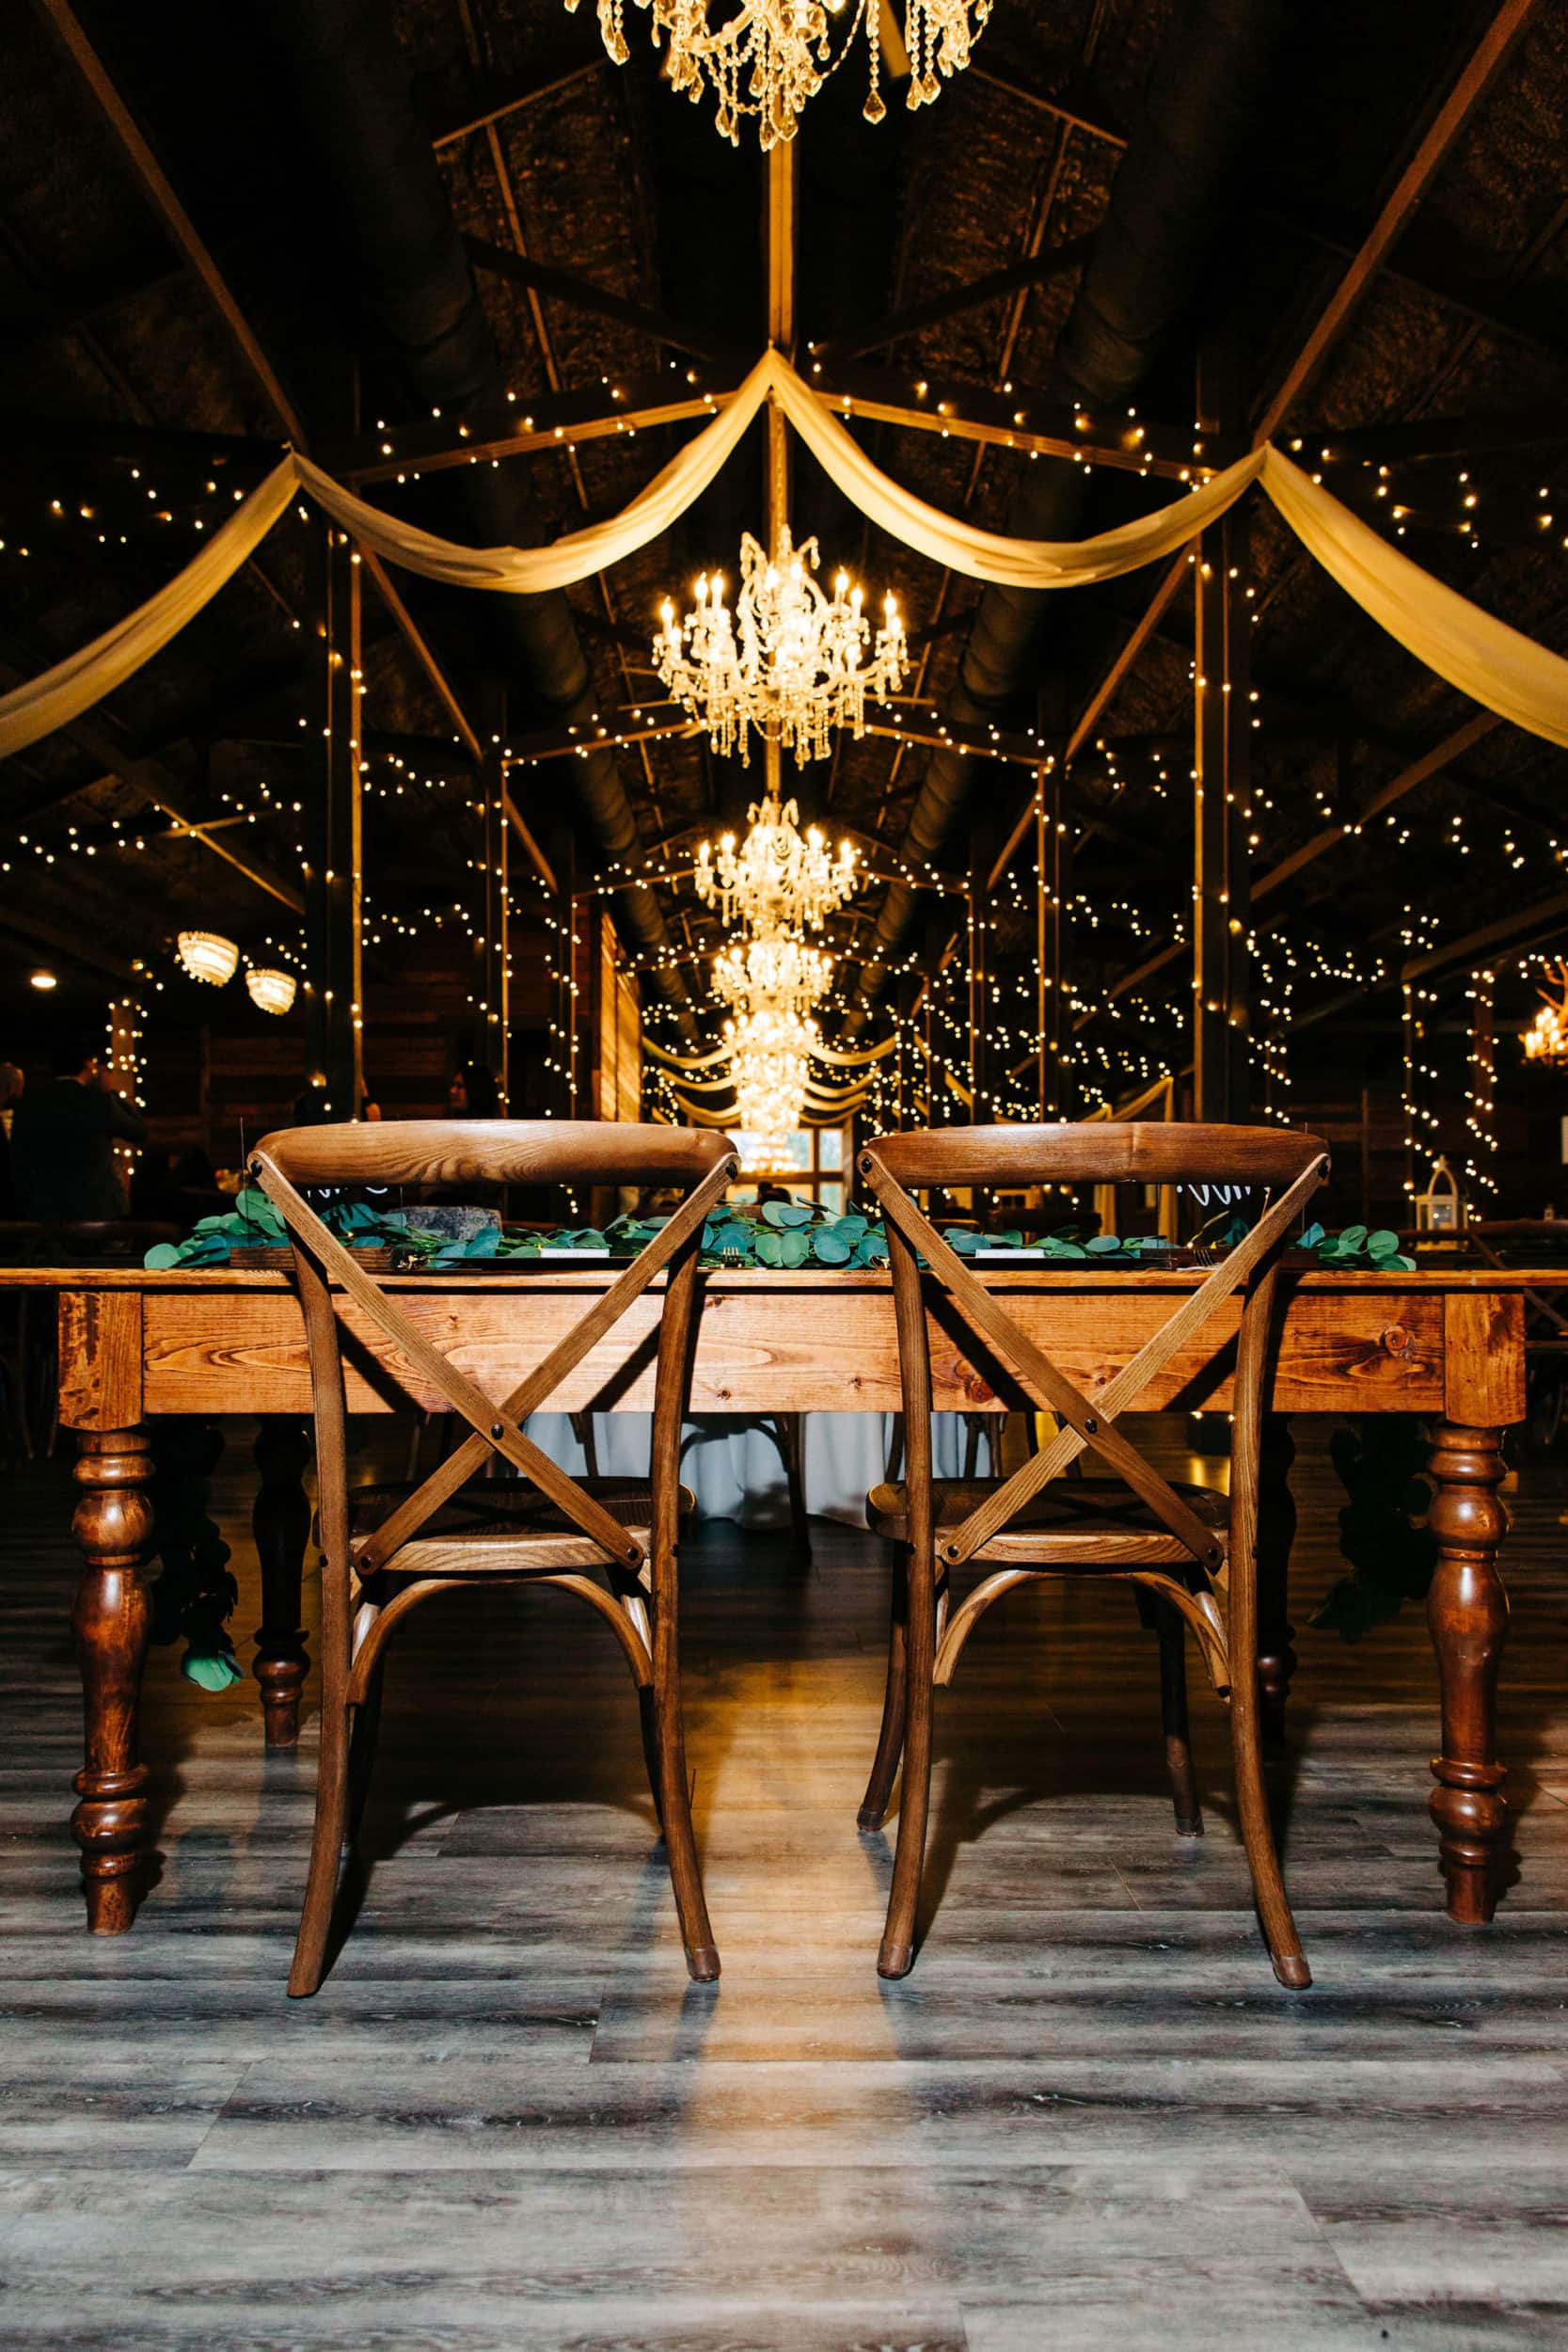 wooden chairs and table inside of wooden interior with chandeliers and garland lights